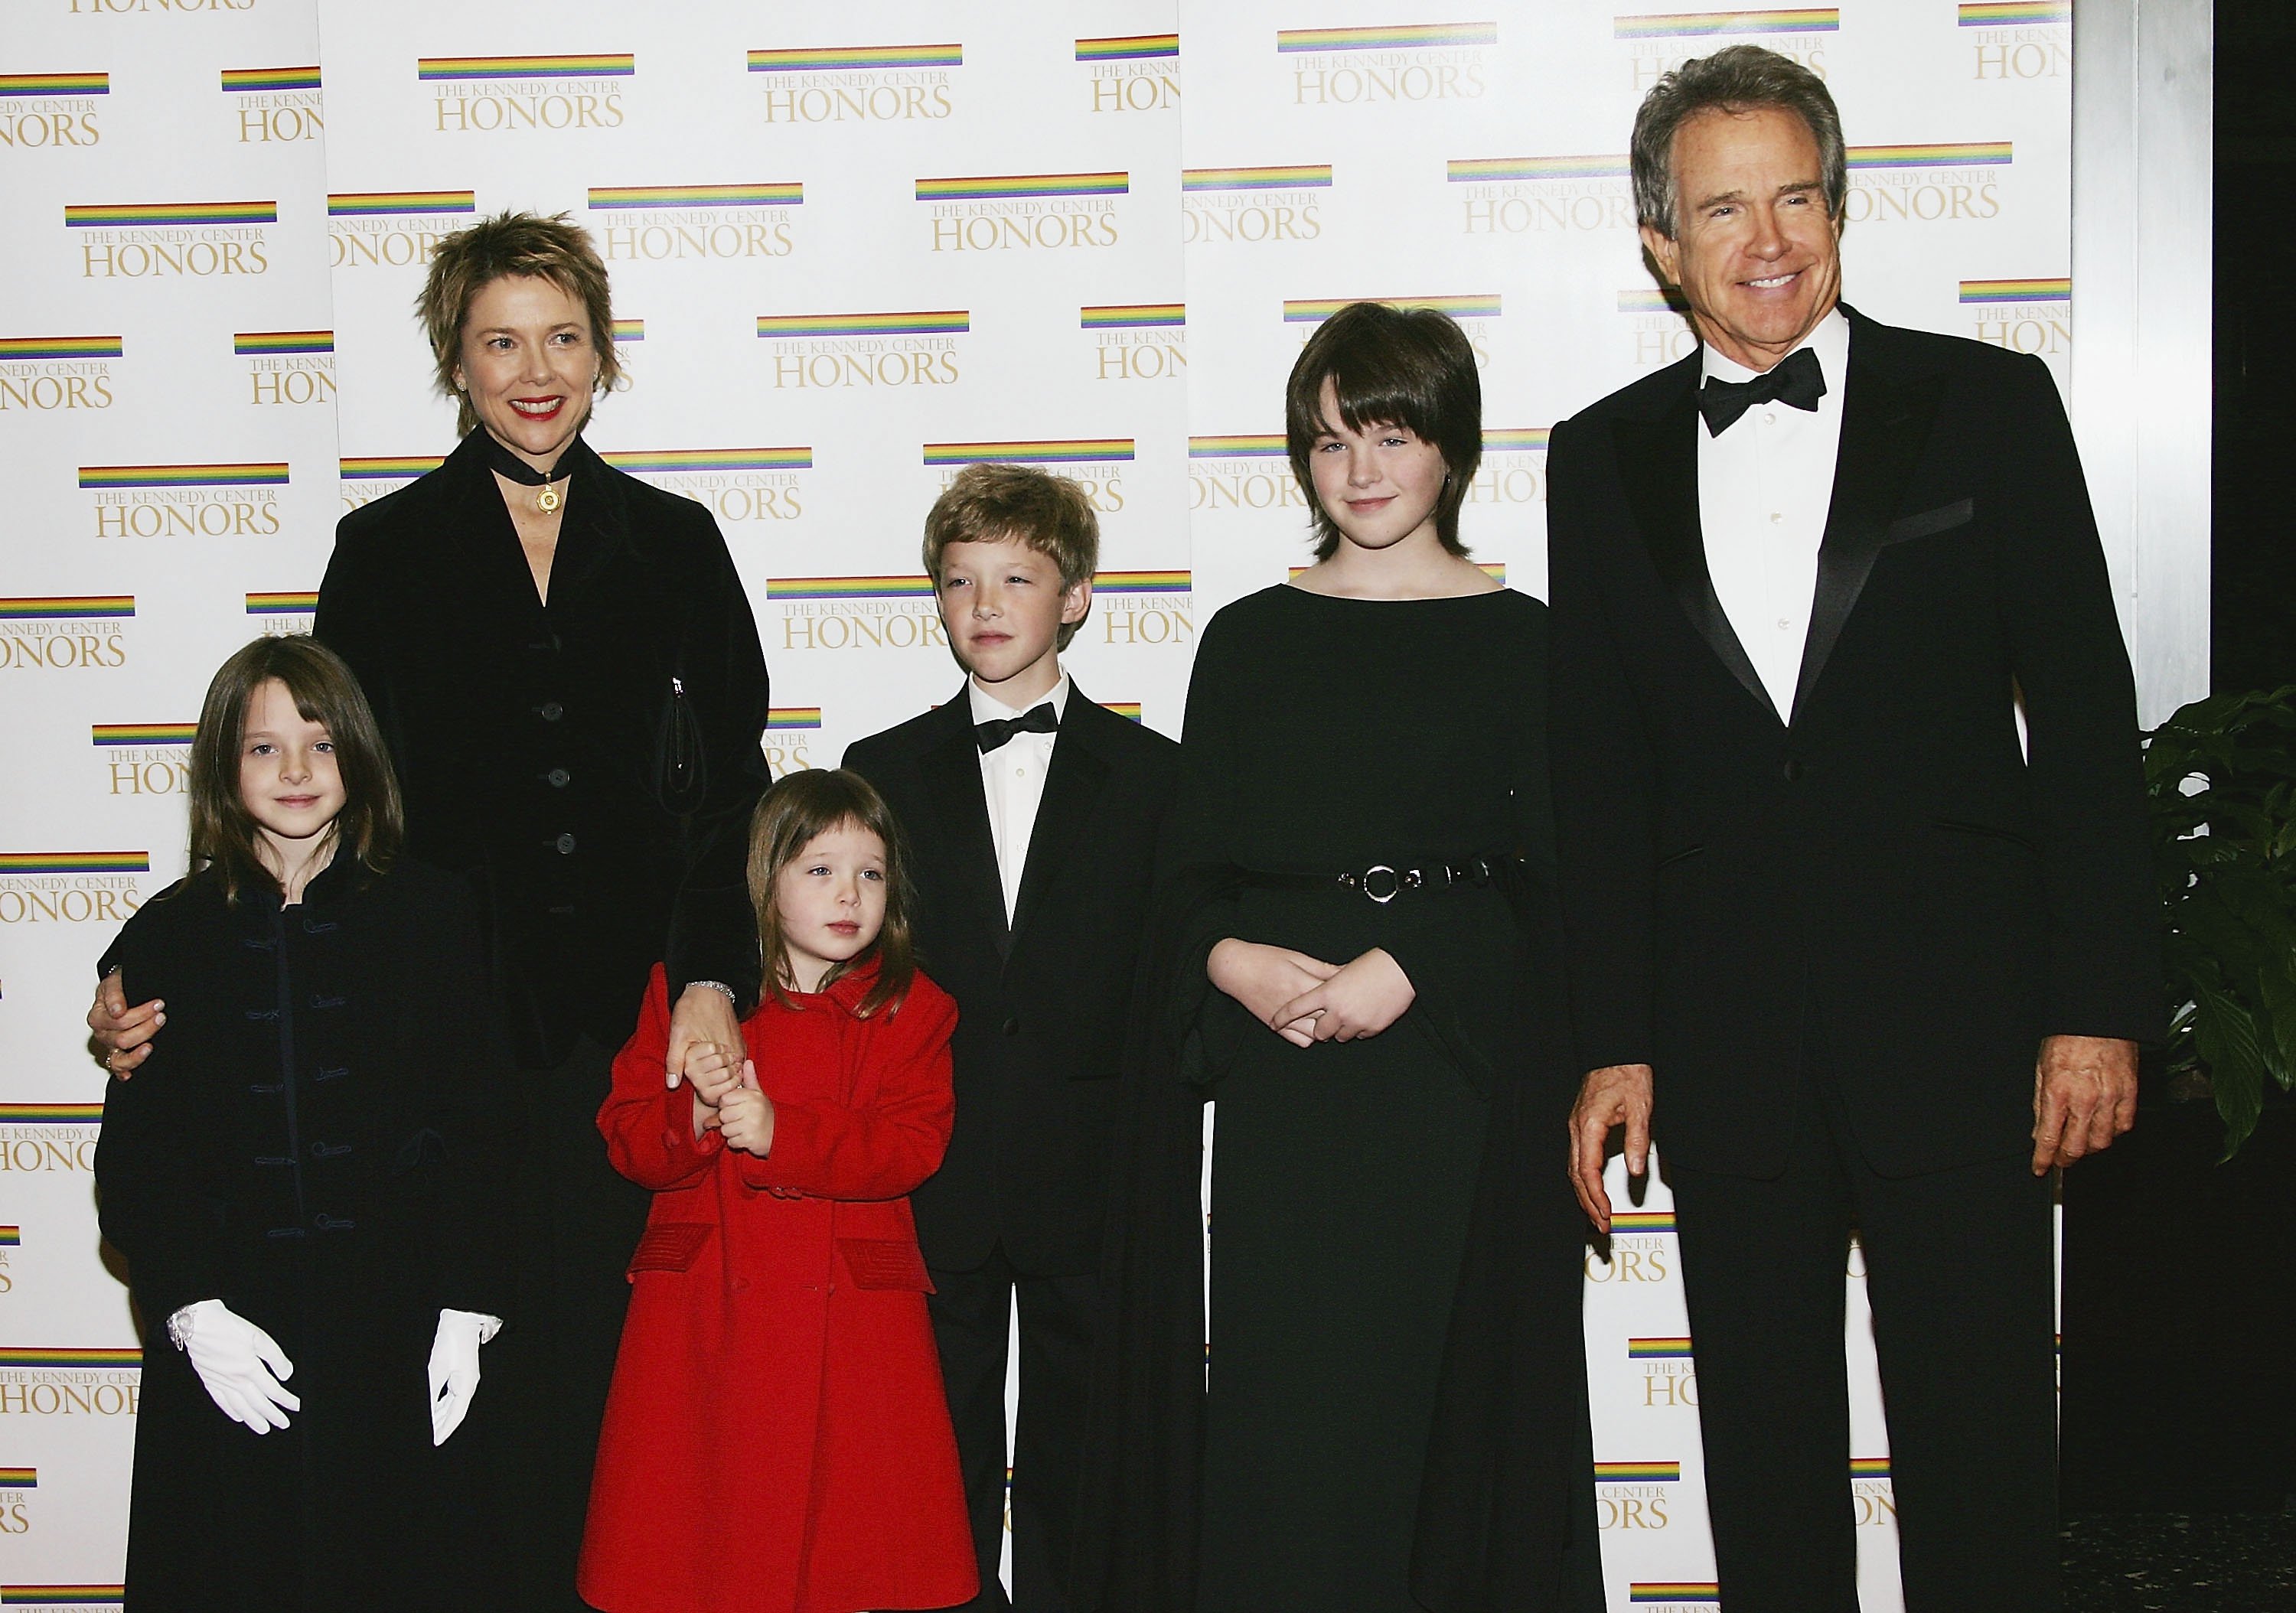 Warren Beatty poses with wife Annette Bening and children Isabel, Ella, Benjamin and Kathlyn at the 27th Annual Kennedy Center Honors at U.S. Department of State, December 4, 2004, in Washington, DC | Photo: Getty Images.